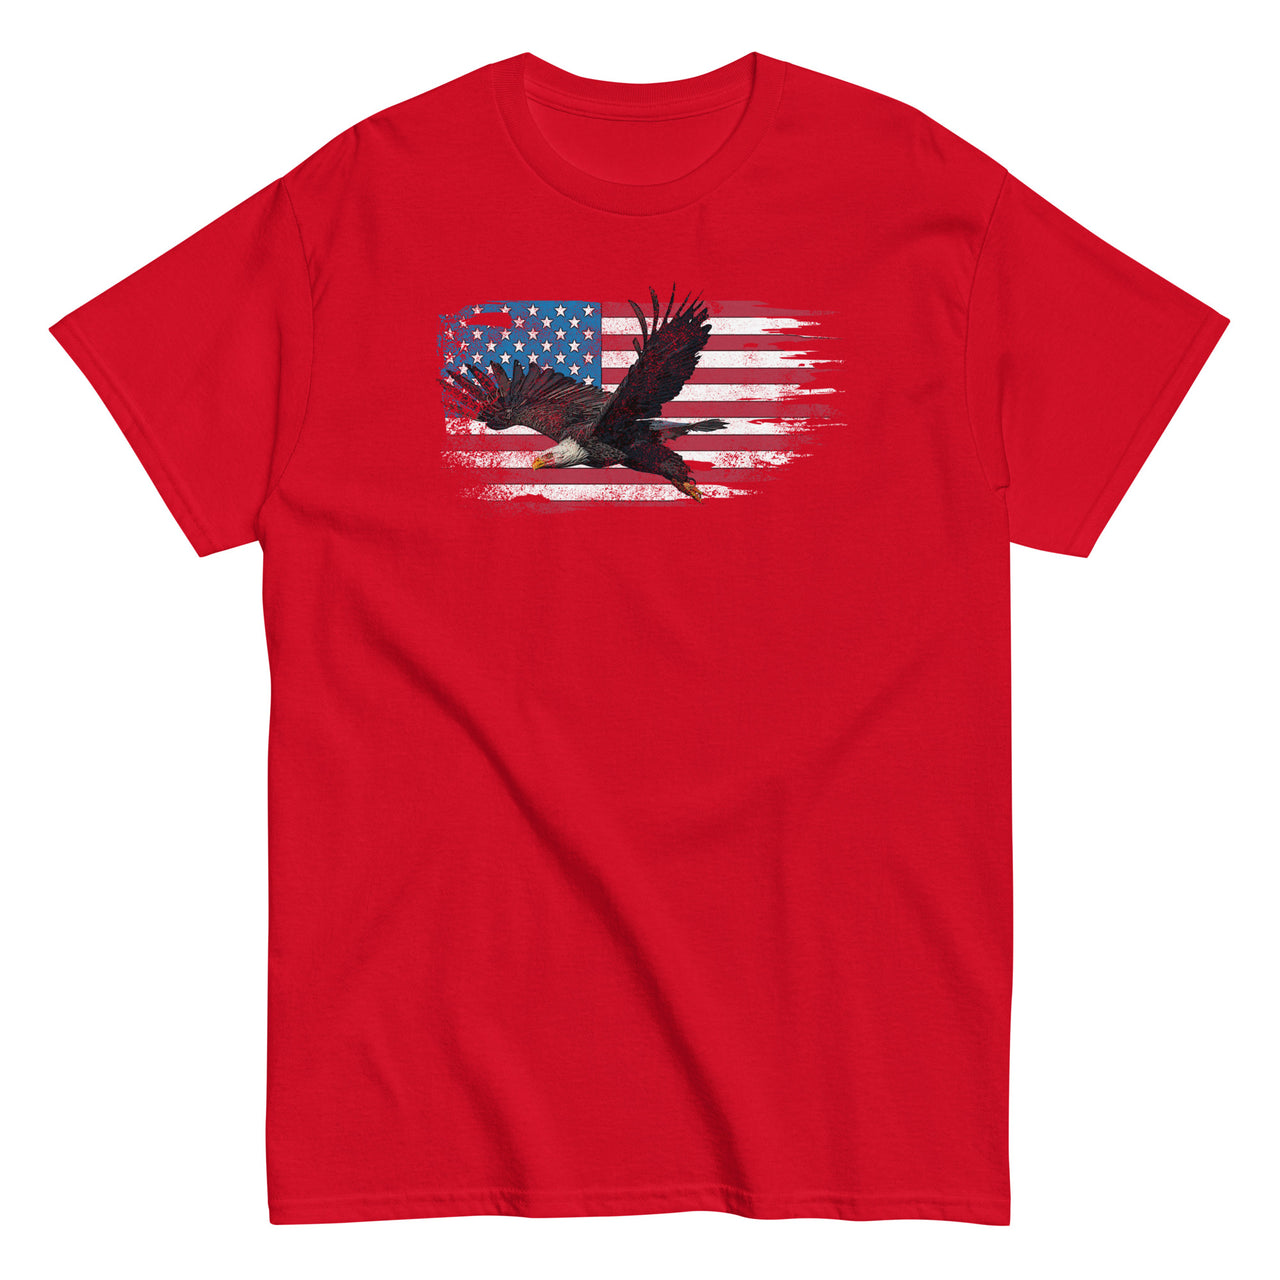 Patriotic American Flag Bald Eagle T-Shirt in red